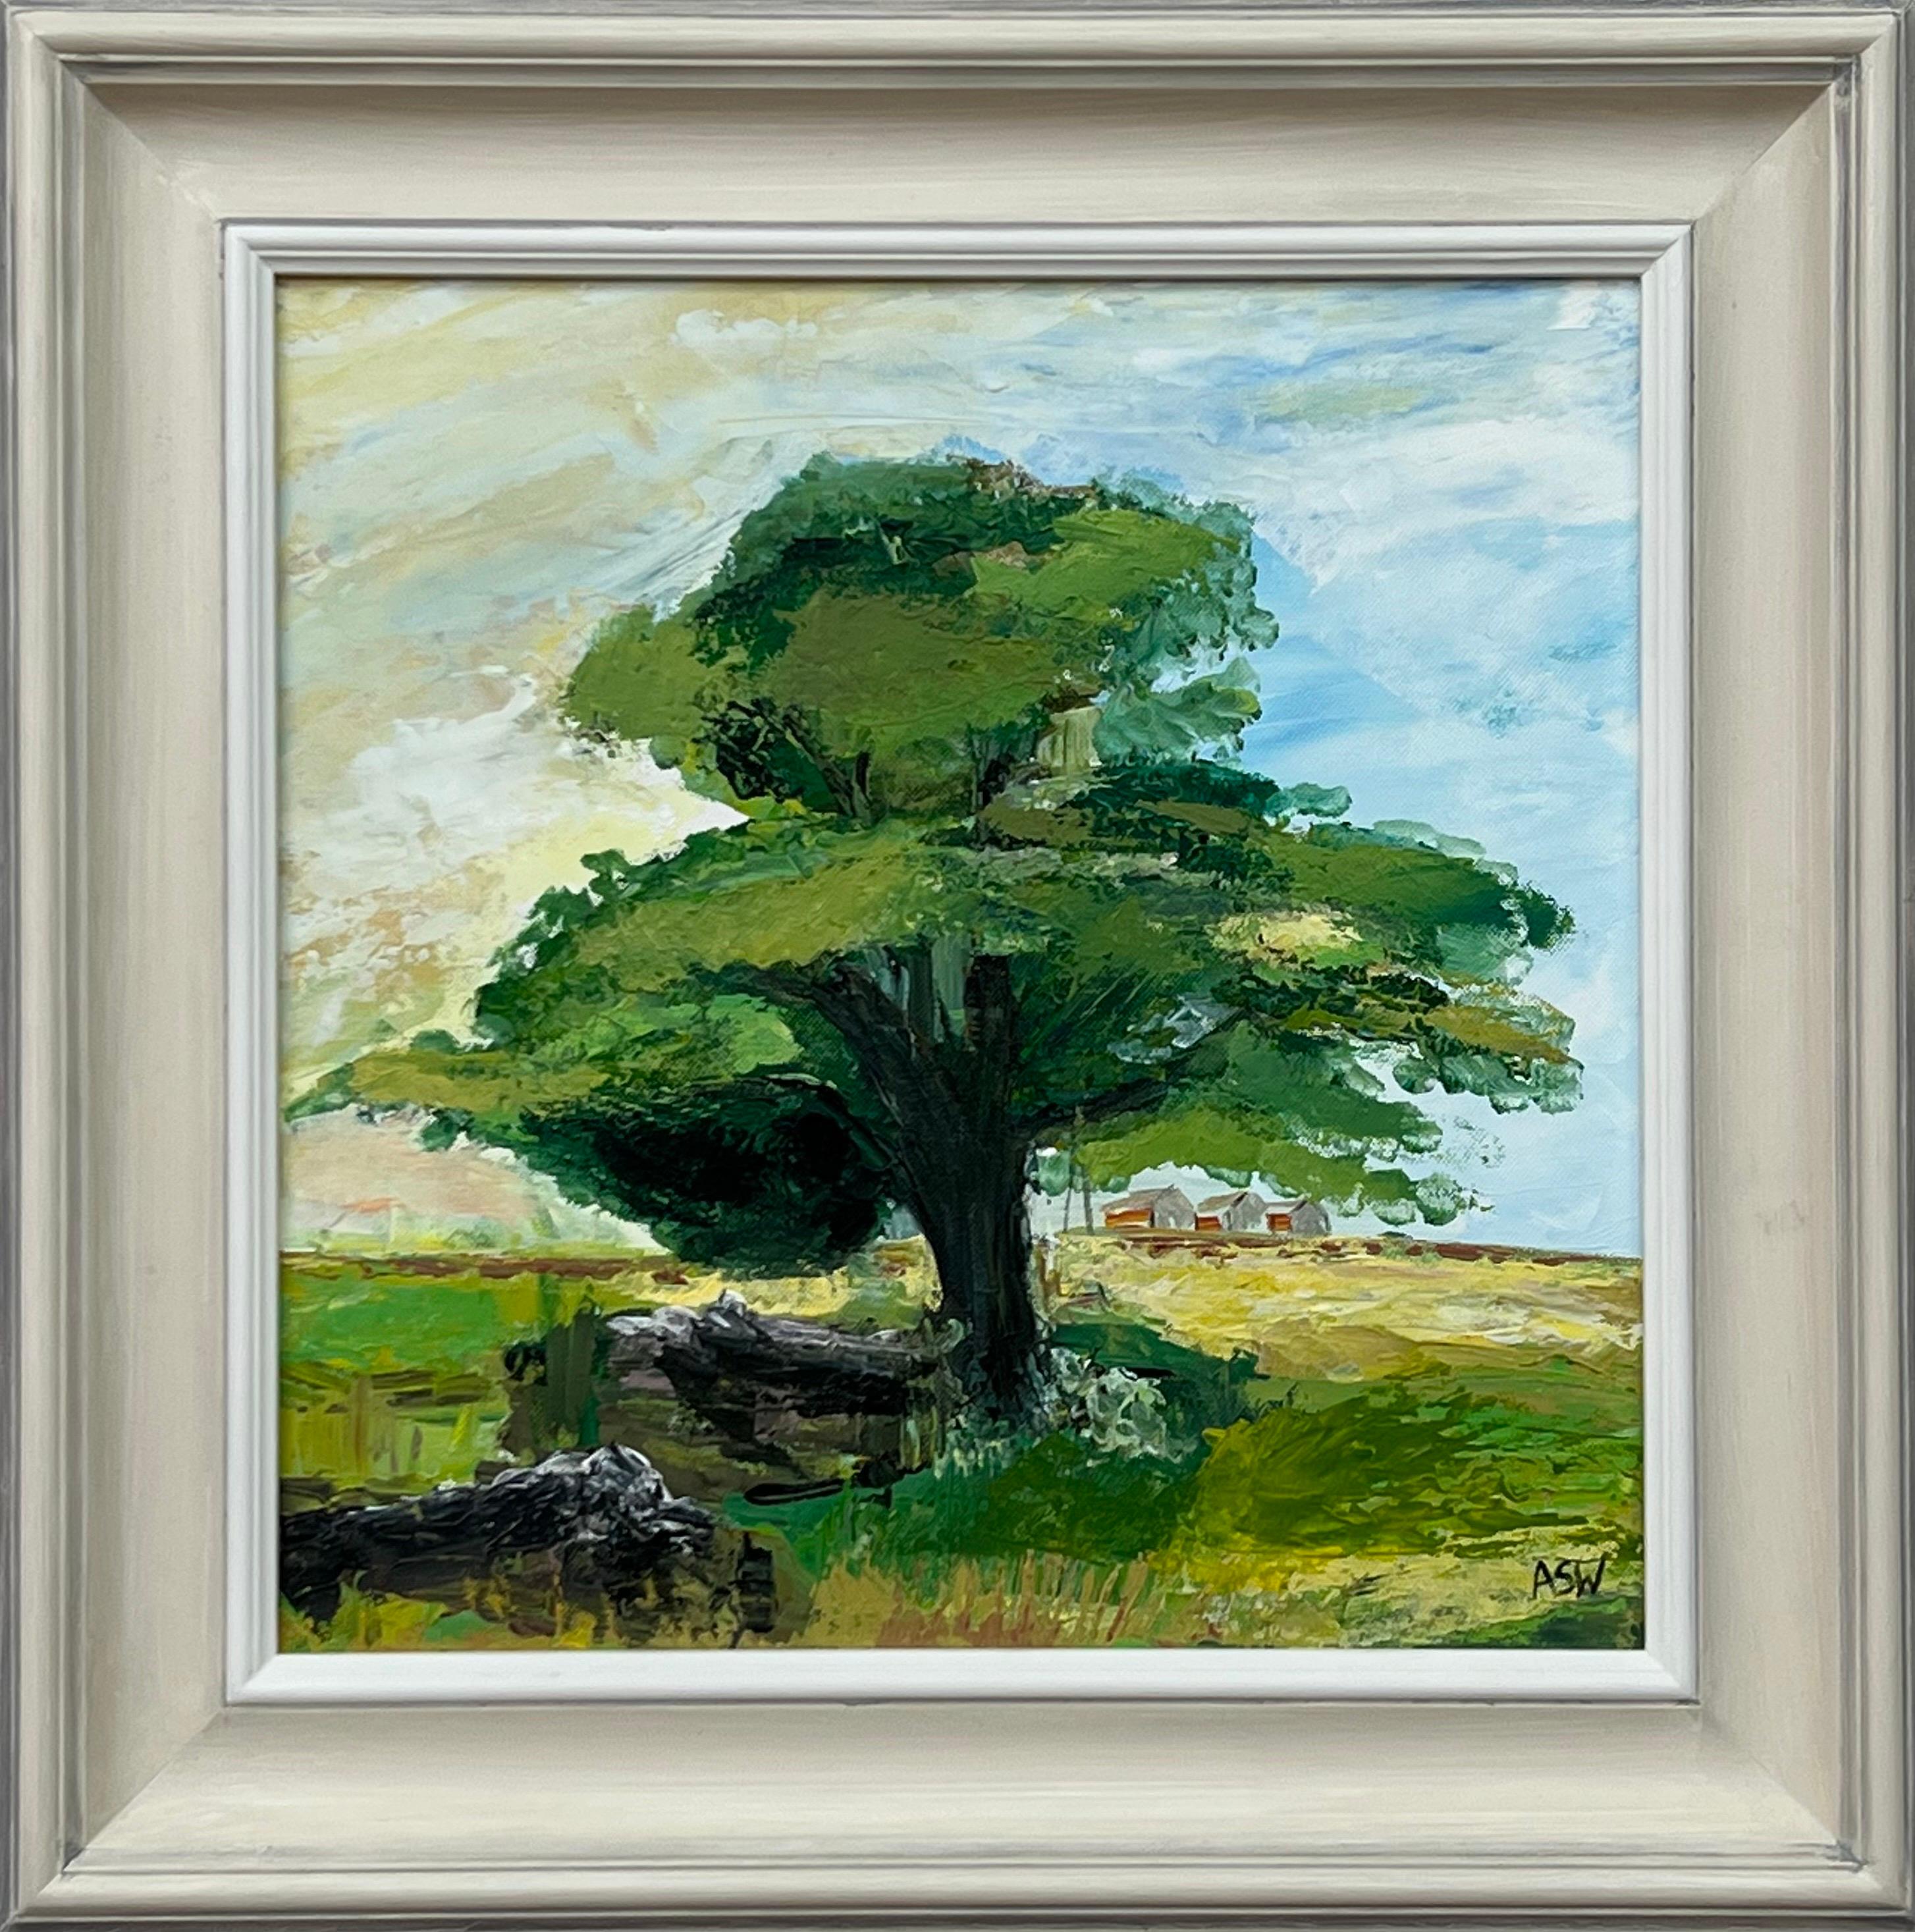 Angela Wakefield Abstract Painting - Expressive Impasto Landscape Painting of Oak Tree by Contemporary British Artist